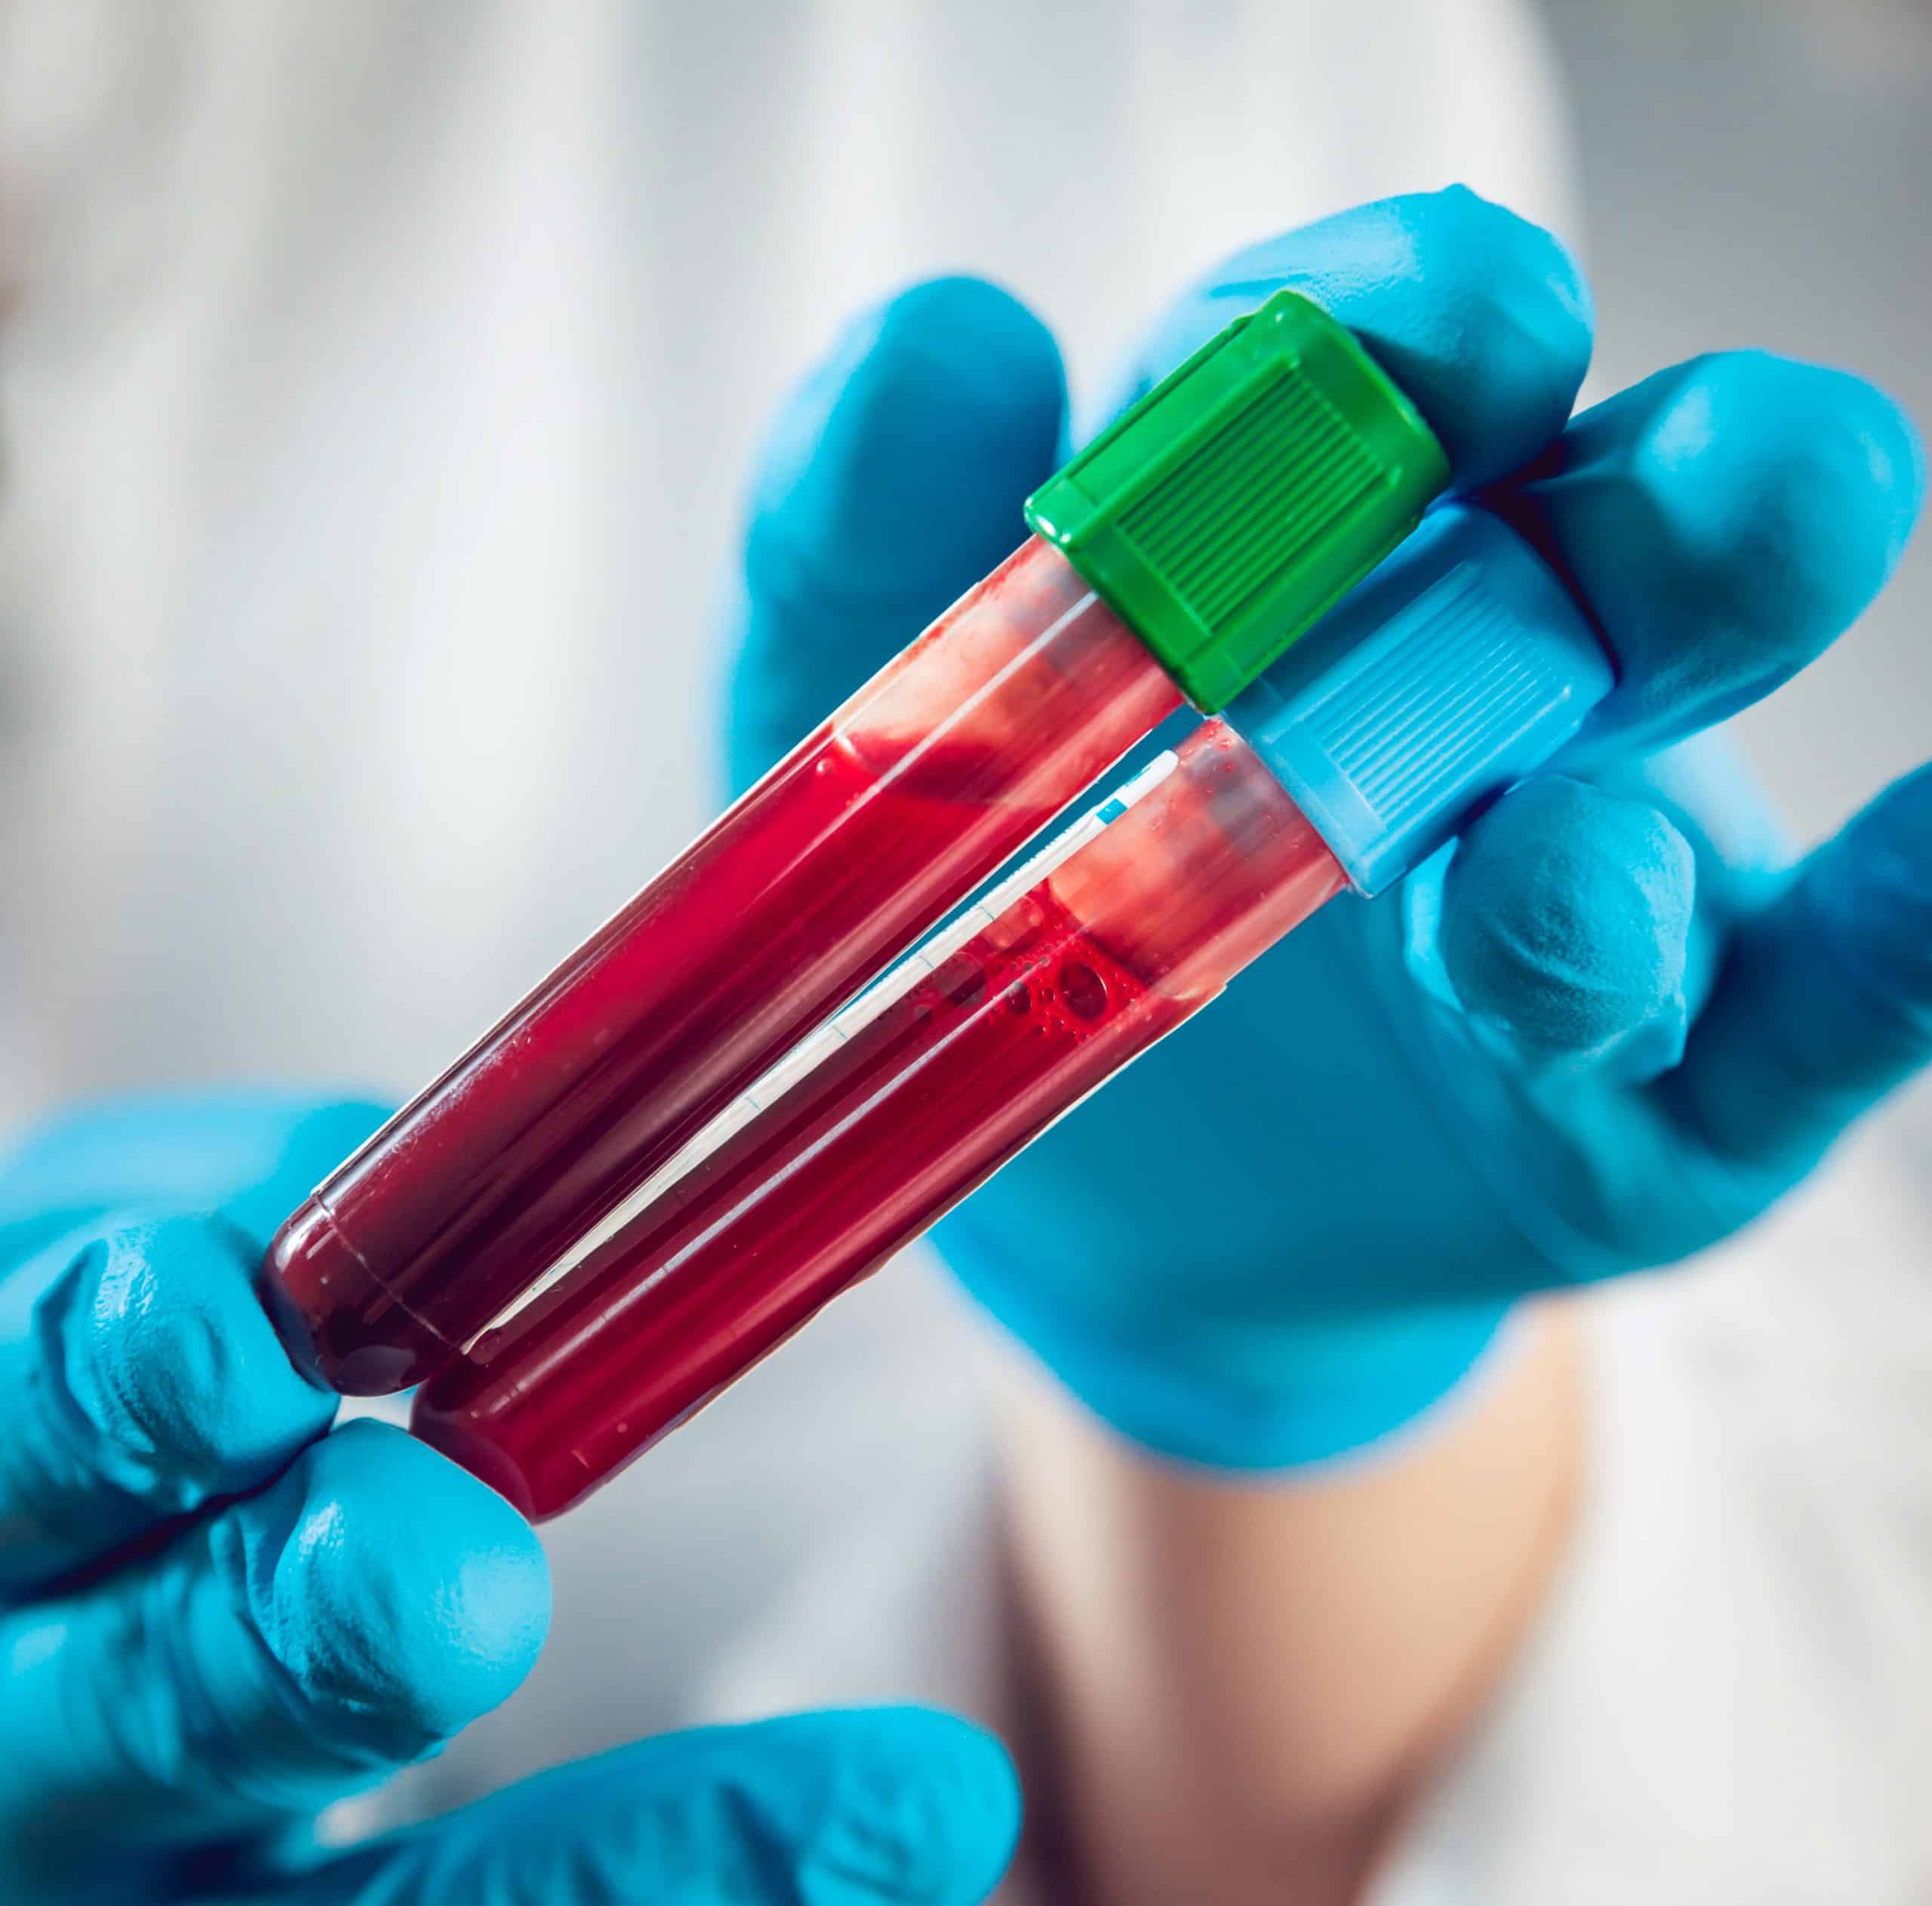 Blood test superior to PSA for detecting high